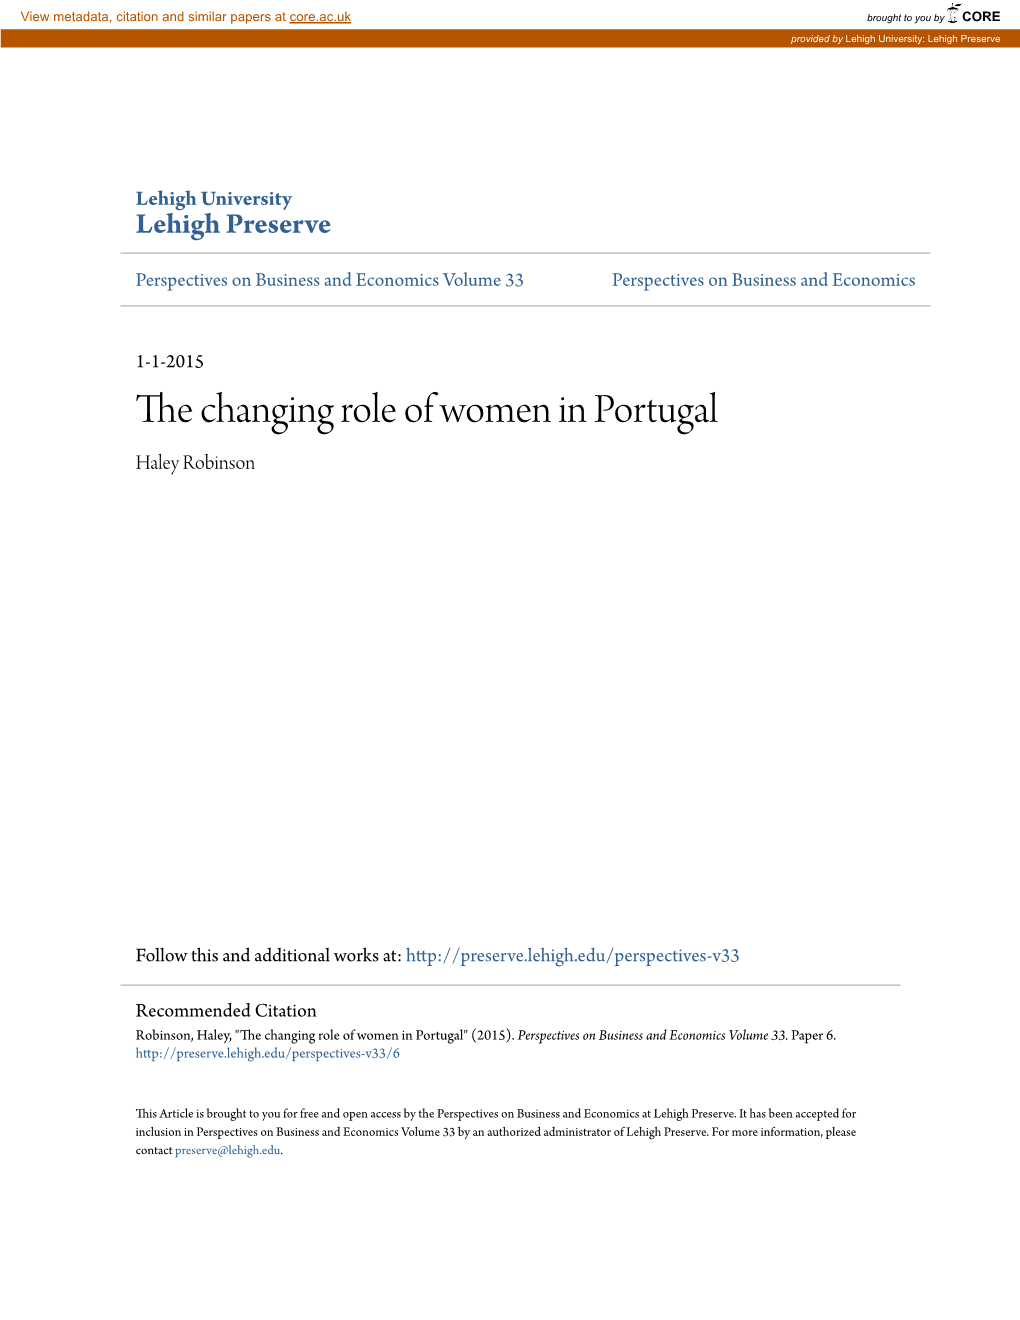 The Changing Role of Women in Portugal Haley Robinson